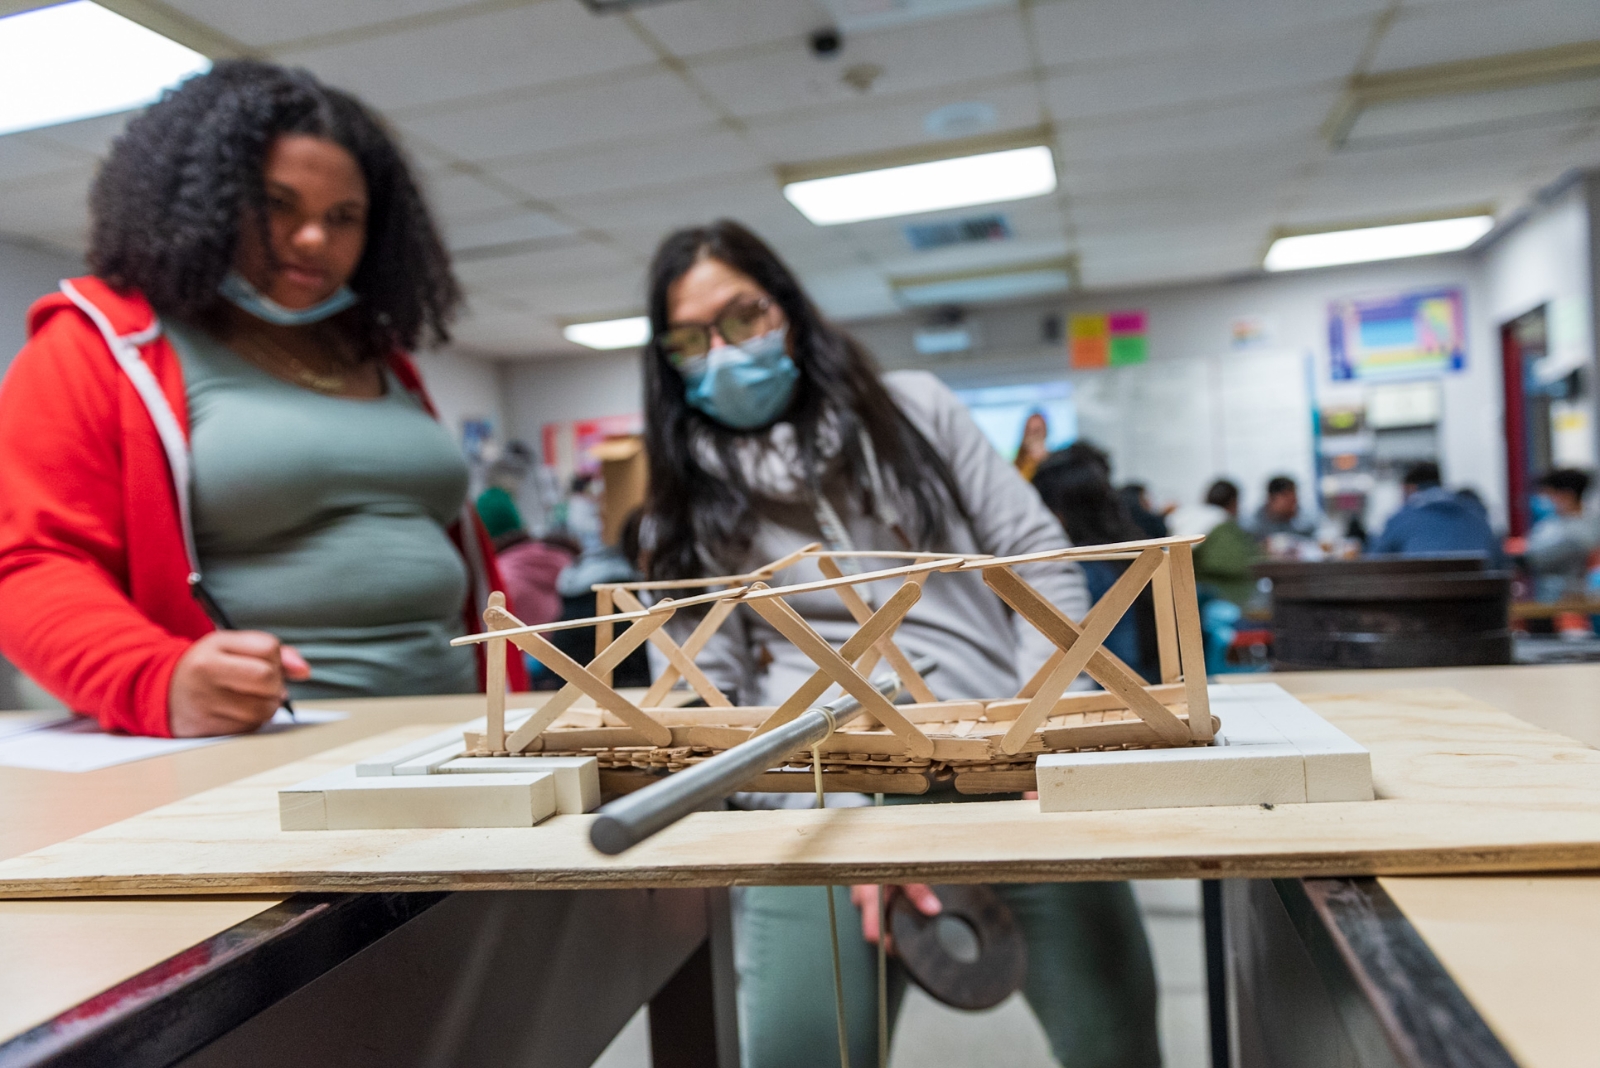 Two students record observations about a bridge made of popsicle sticks.